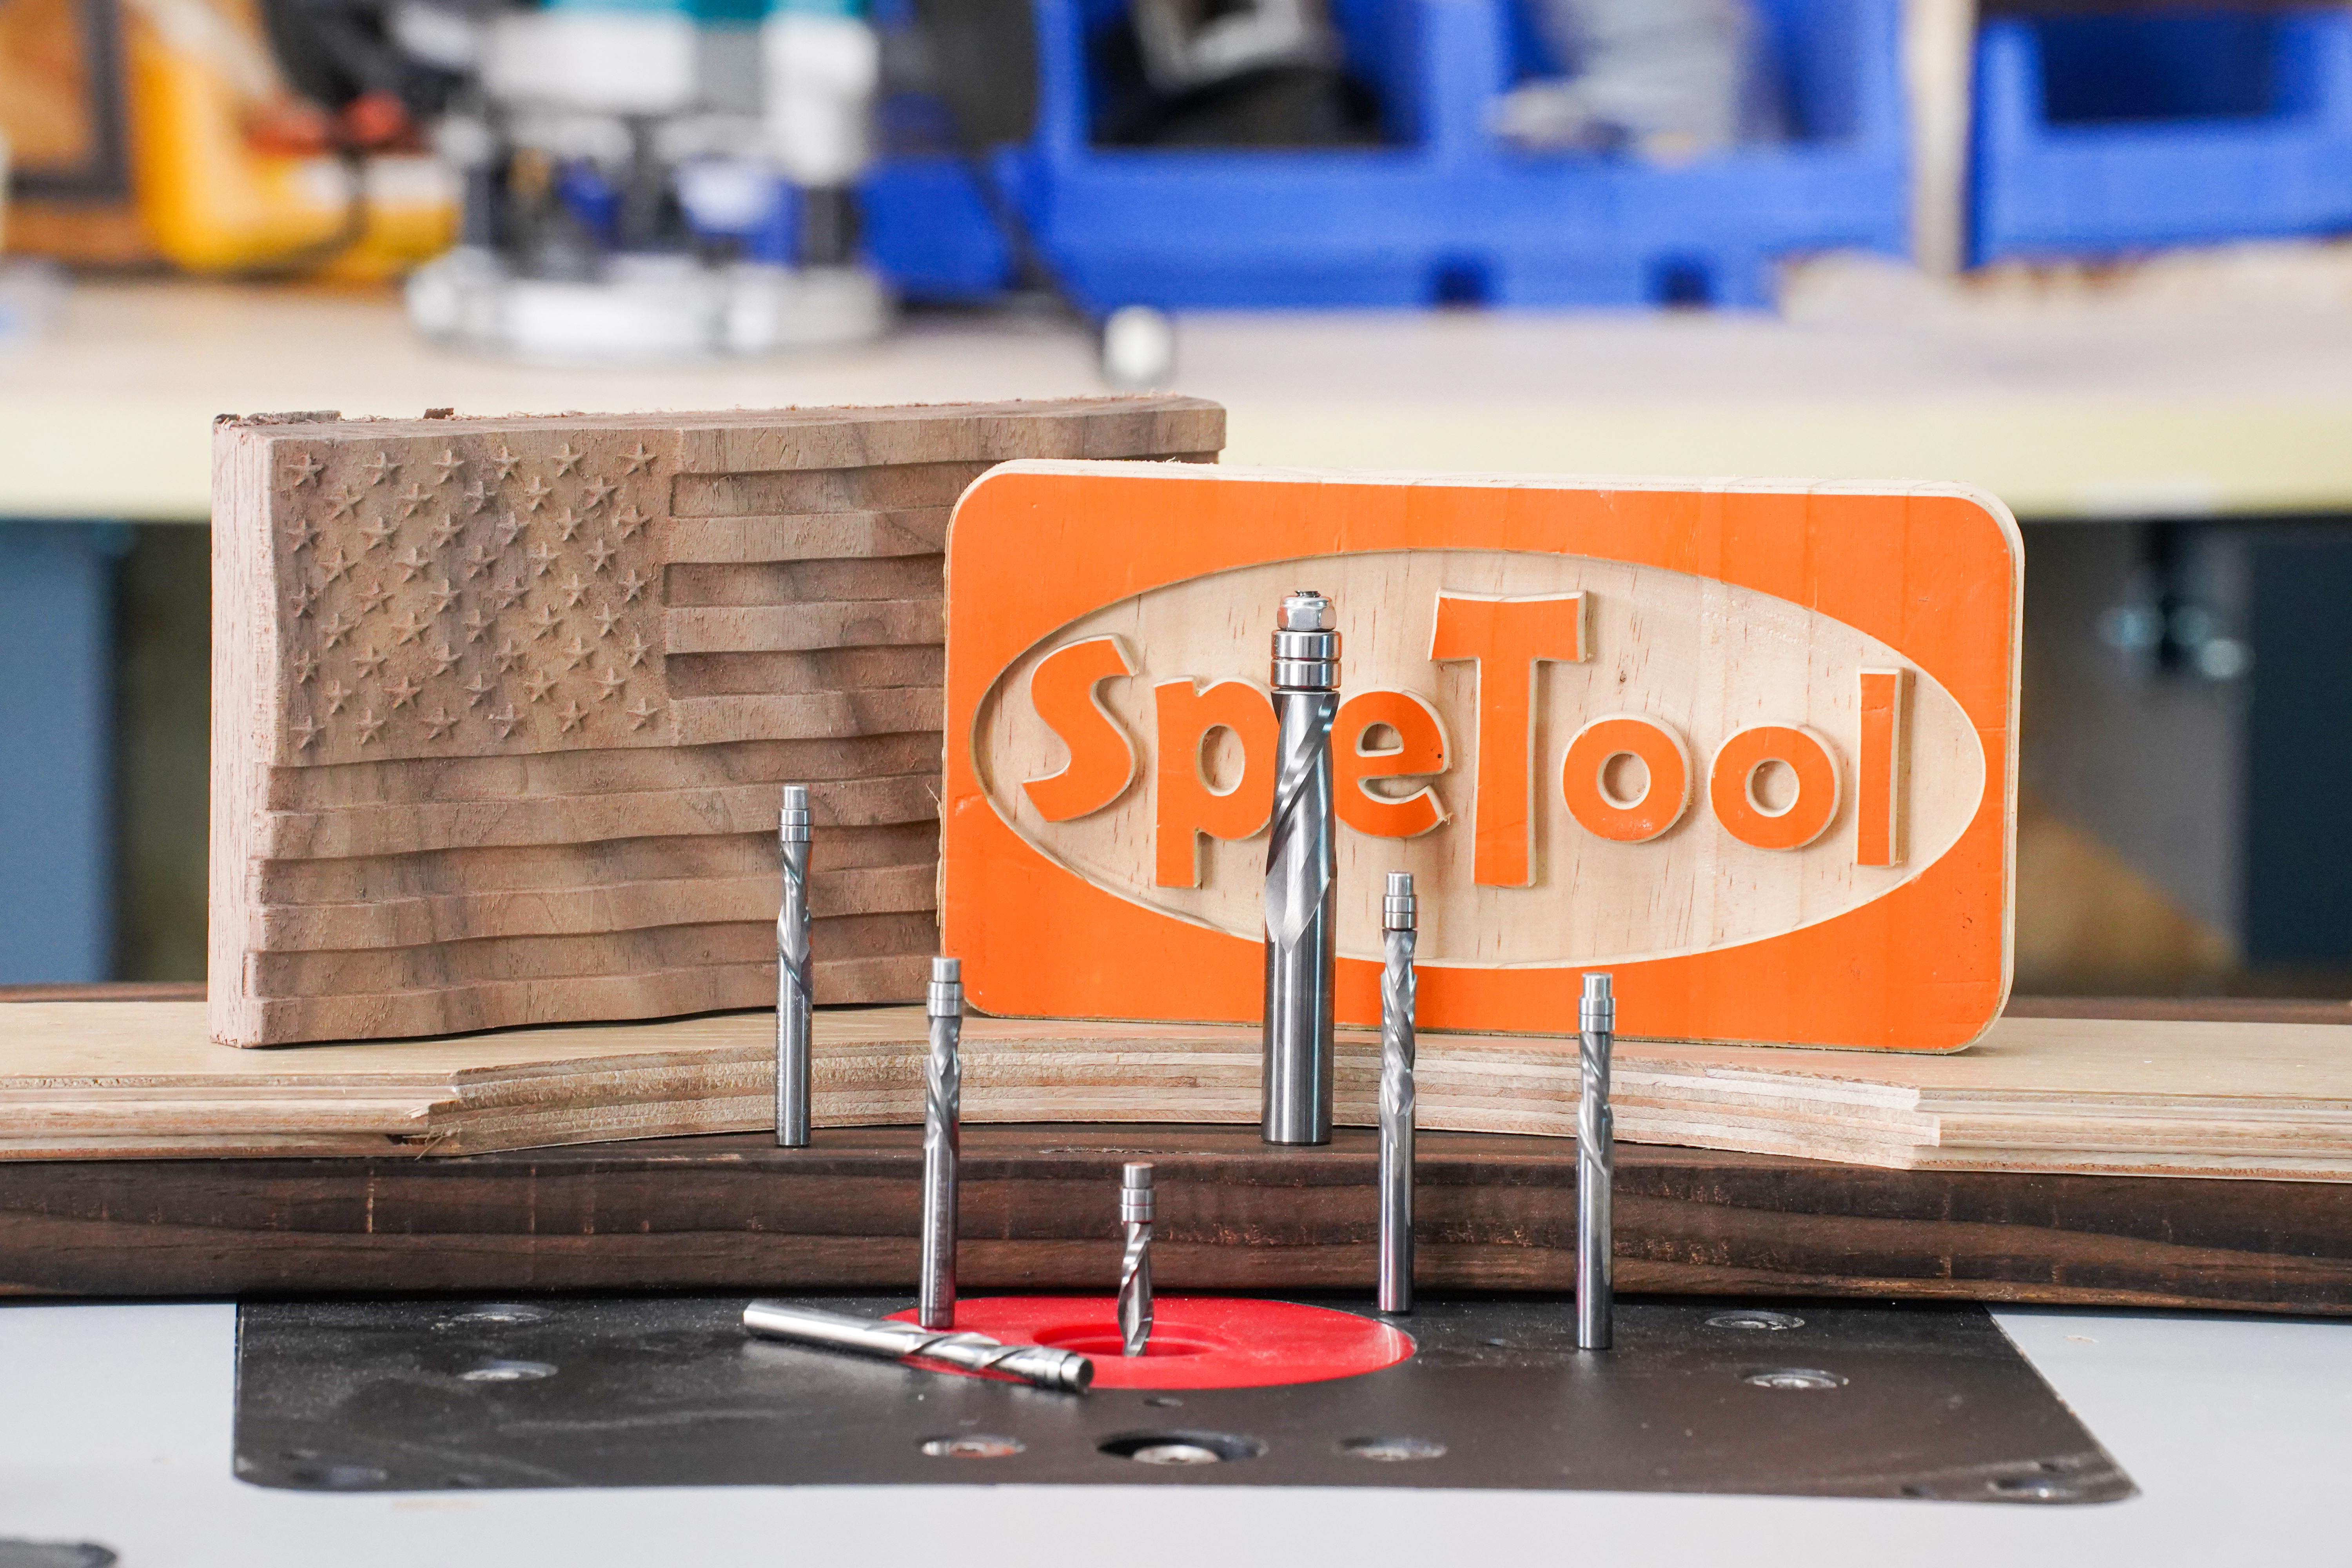 SpeTool Introduces High-Quality CNC Router Bits for Industrial and DIY Applications